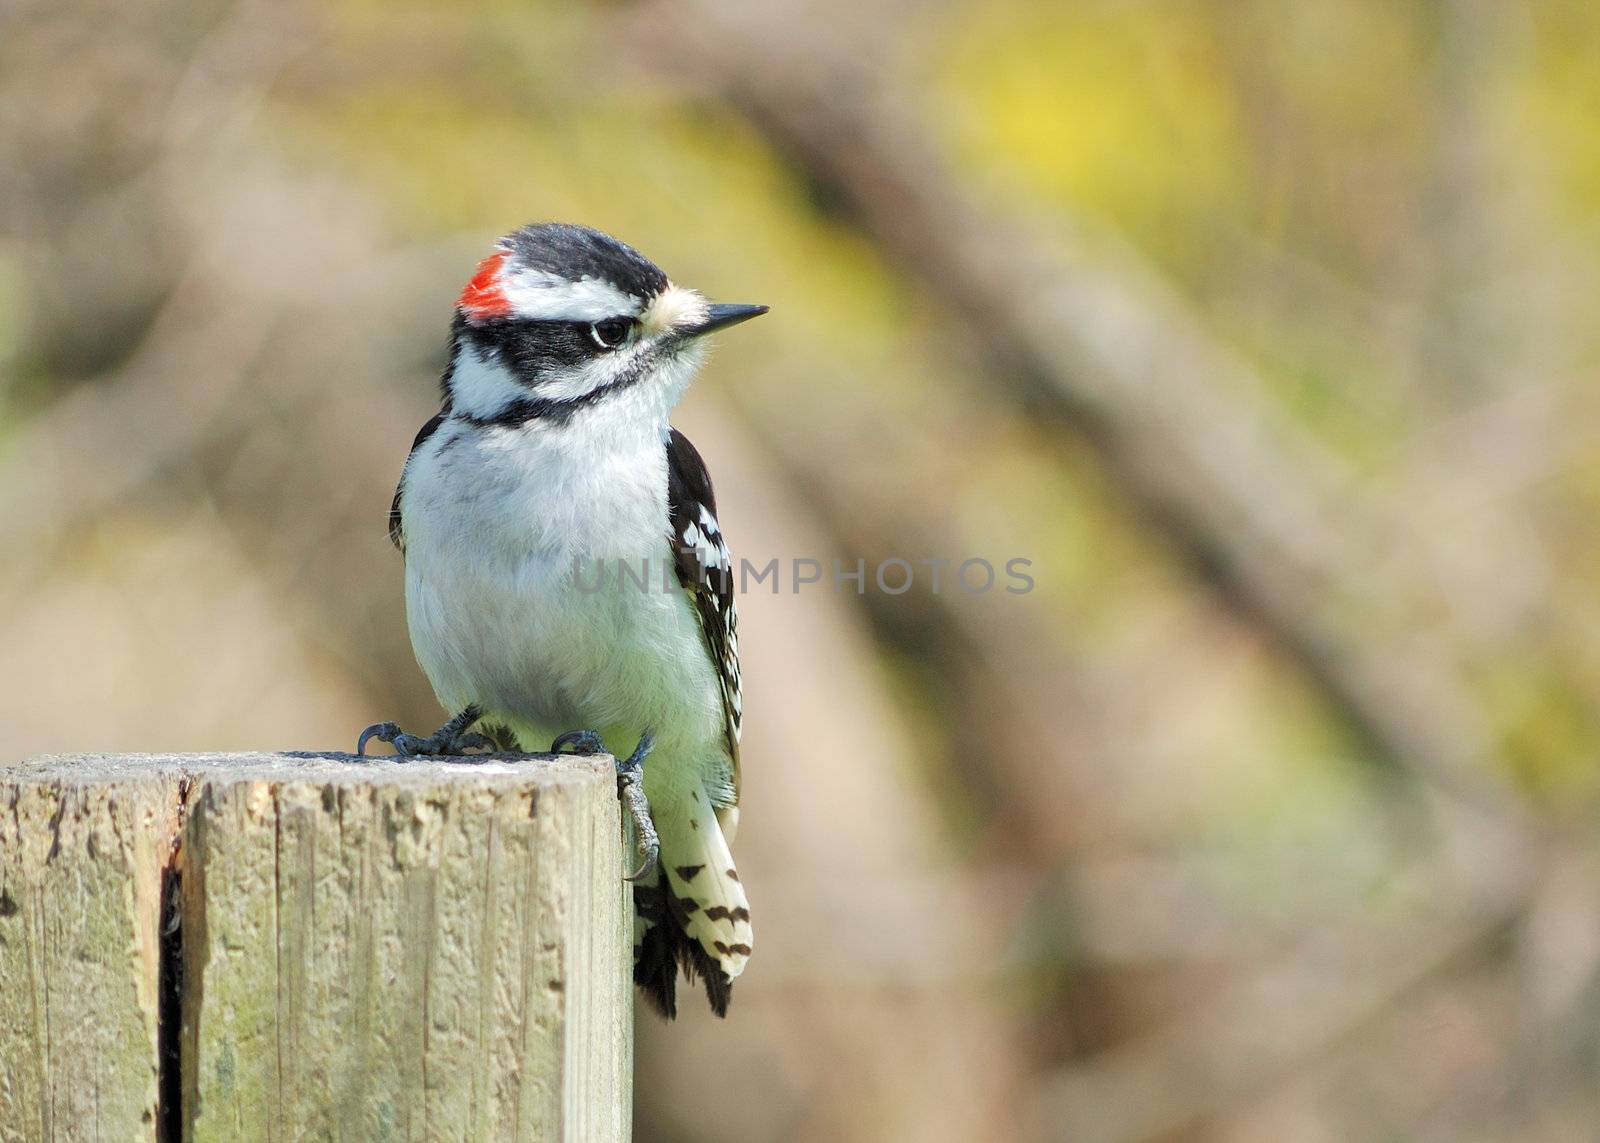 A male downy woodpecker perched on post.